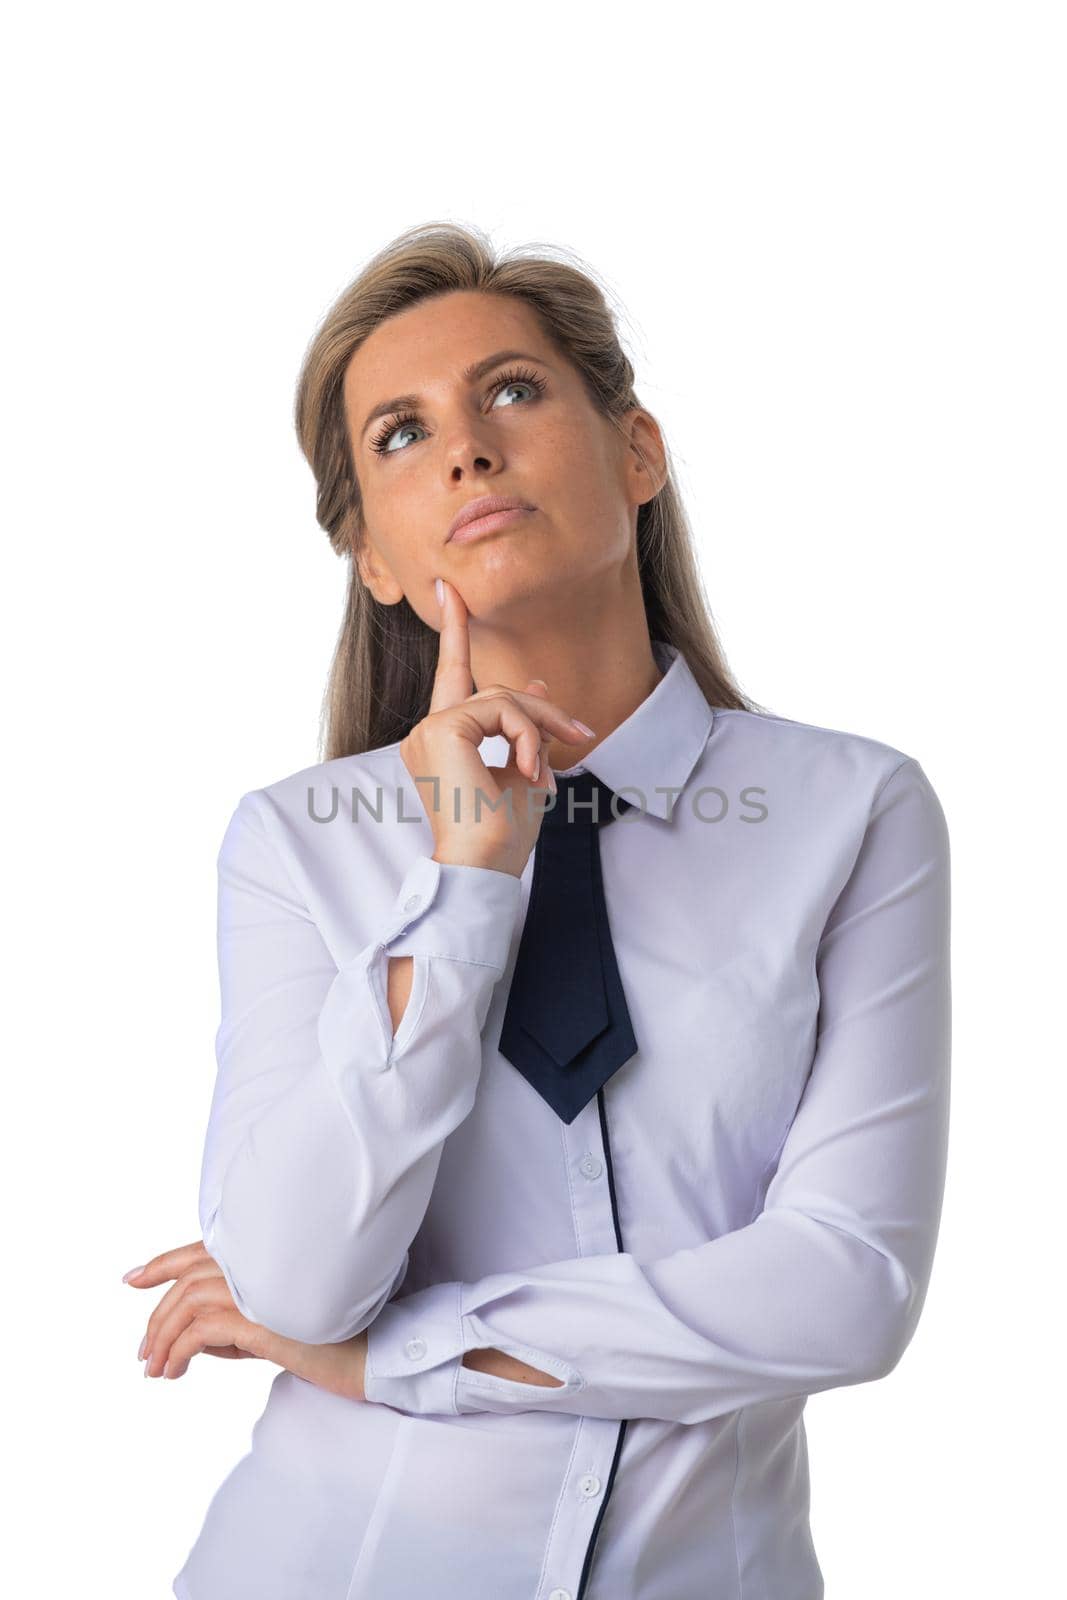 Pensive business woman looking up by ALotOfPeople